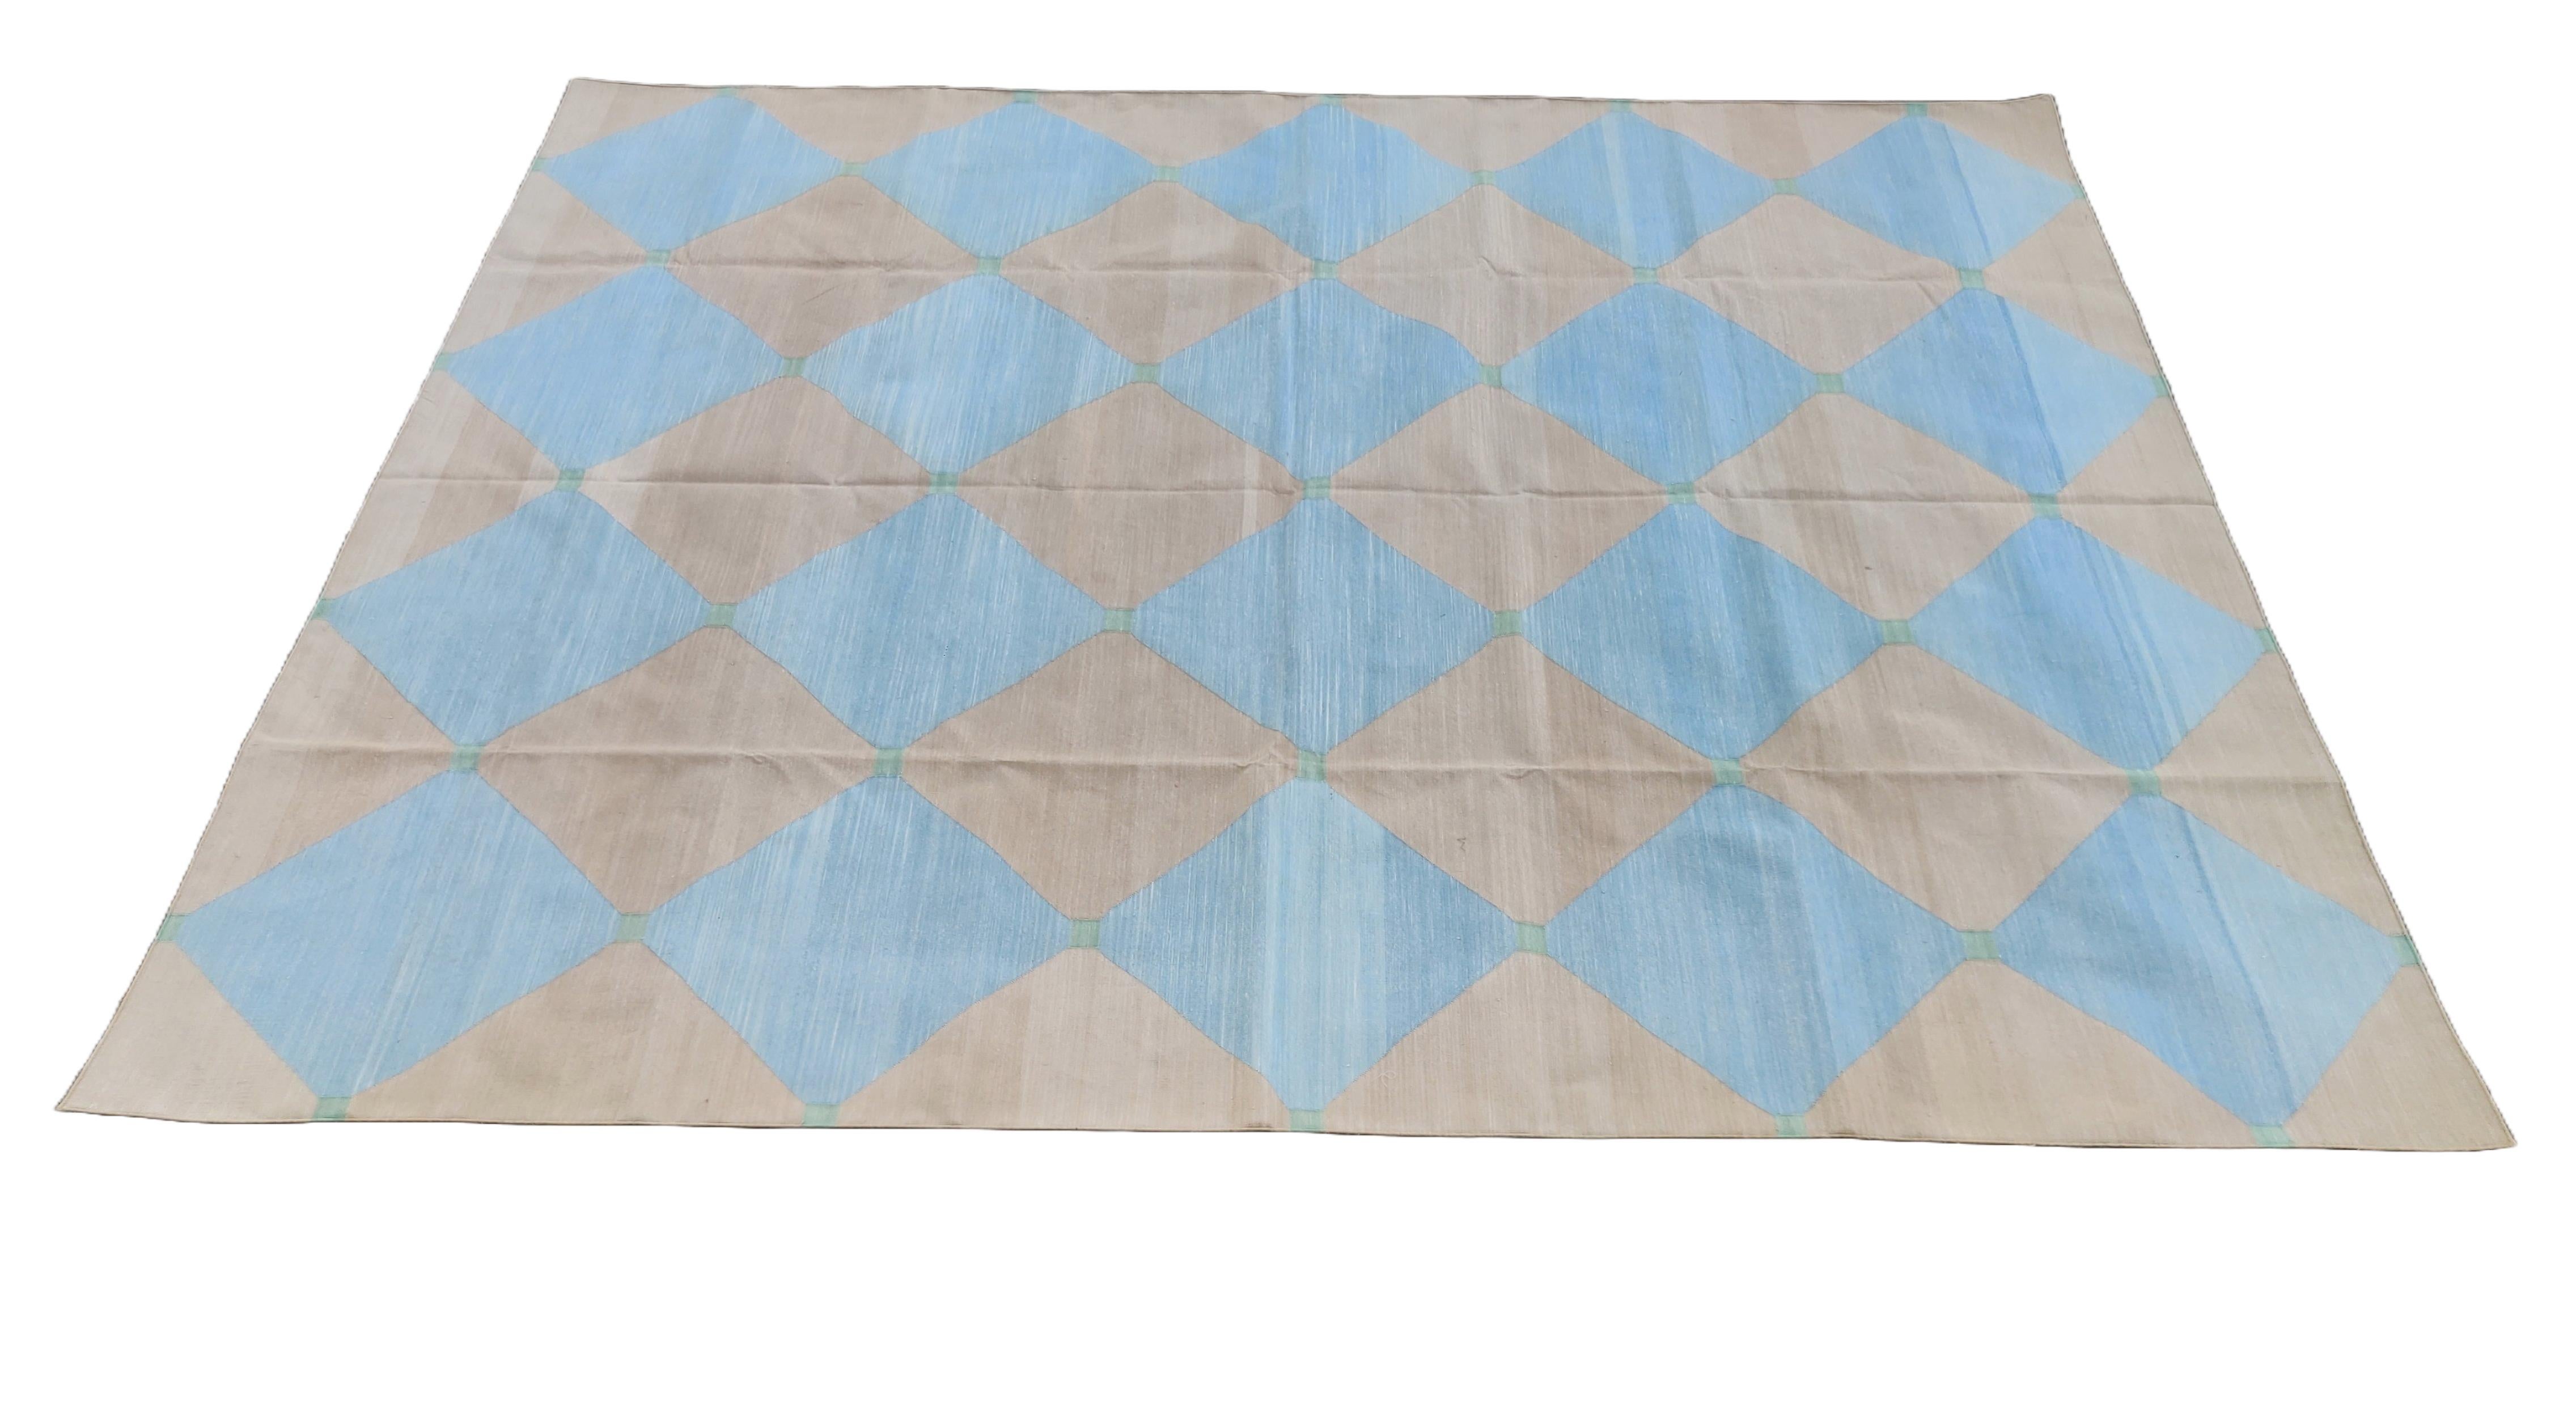 Handmade Cotton Area Flat Weave Rug, 8x10 Beige And Blue Tile Patterned Dhurrie In New Condition For Sale In Jaipur, IN